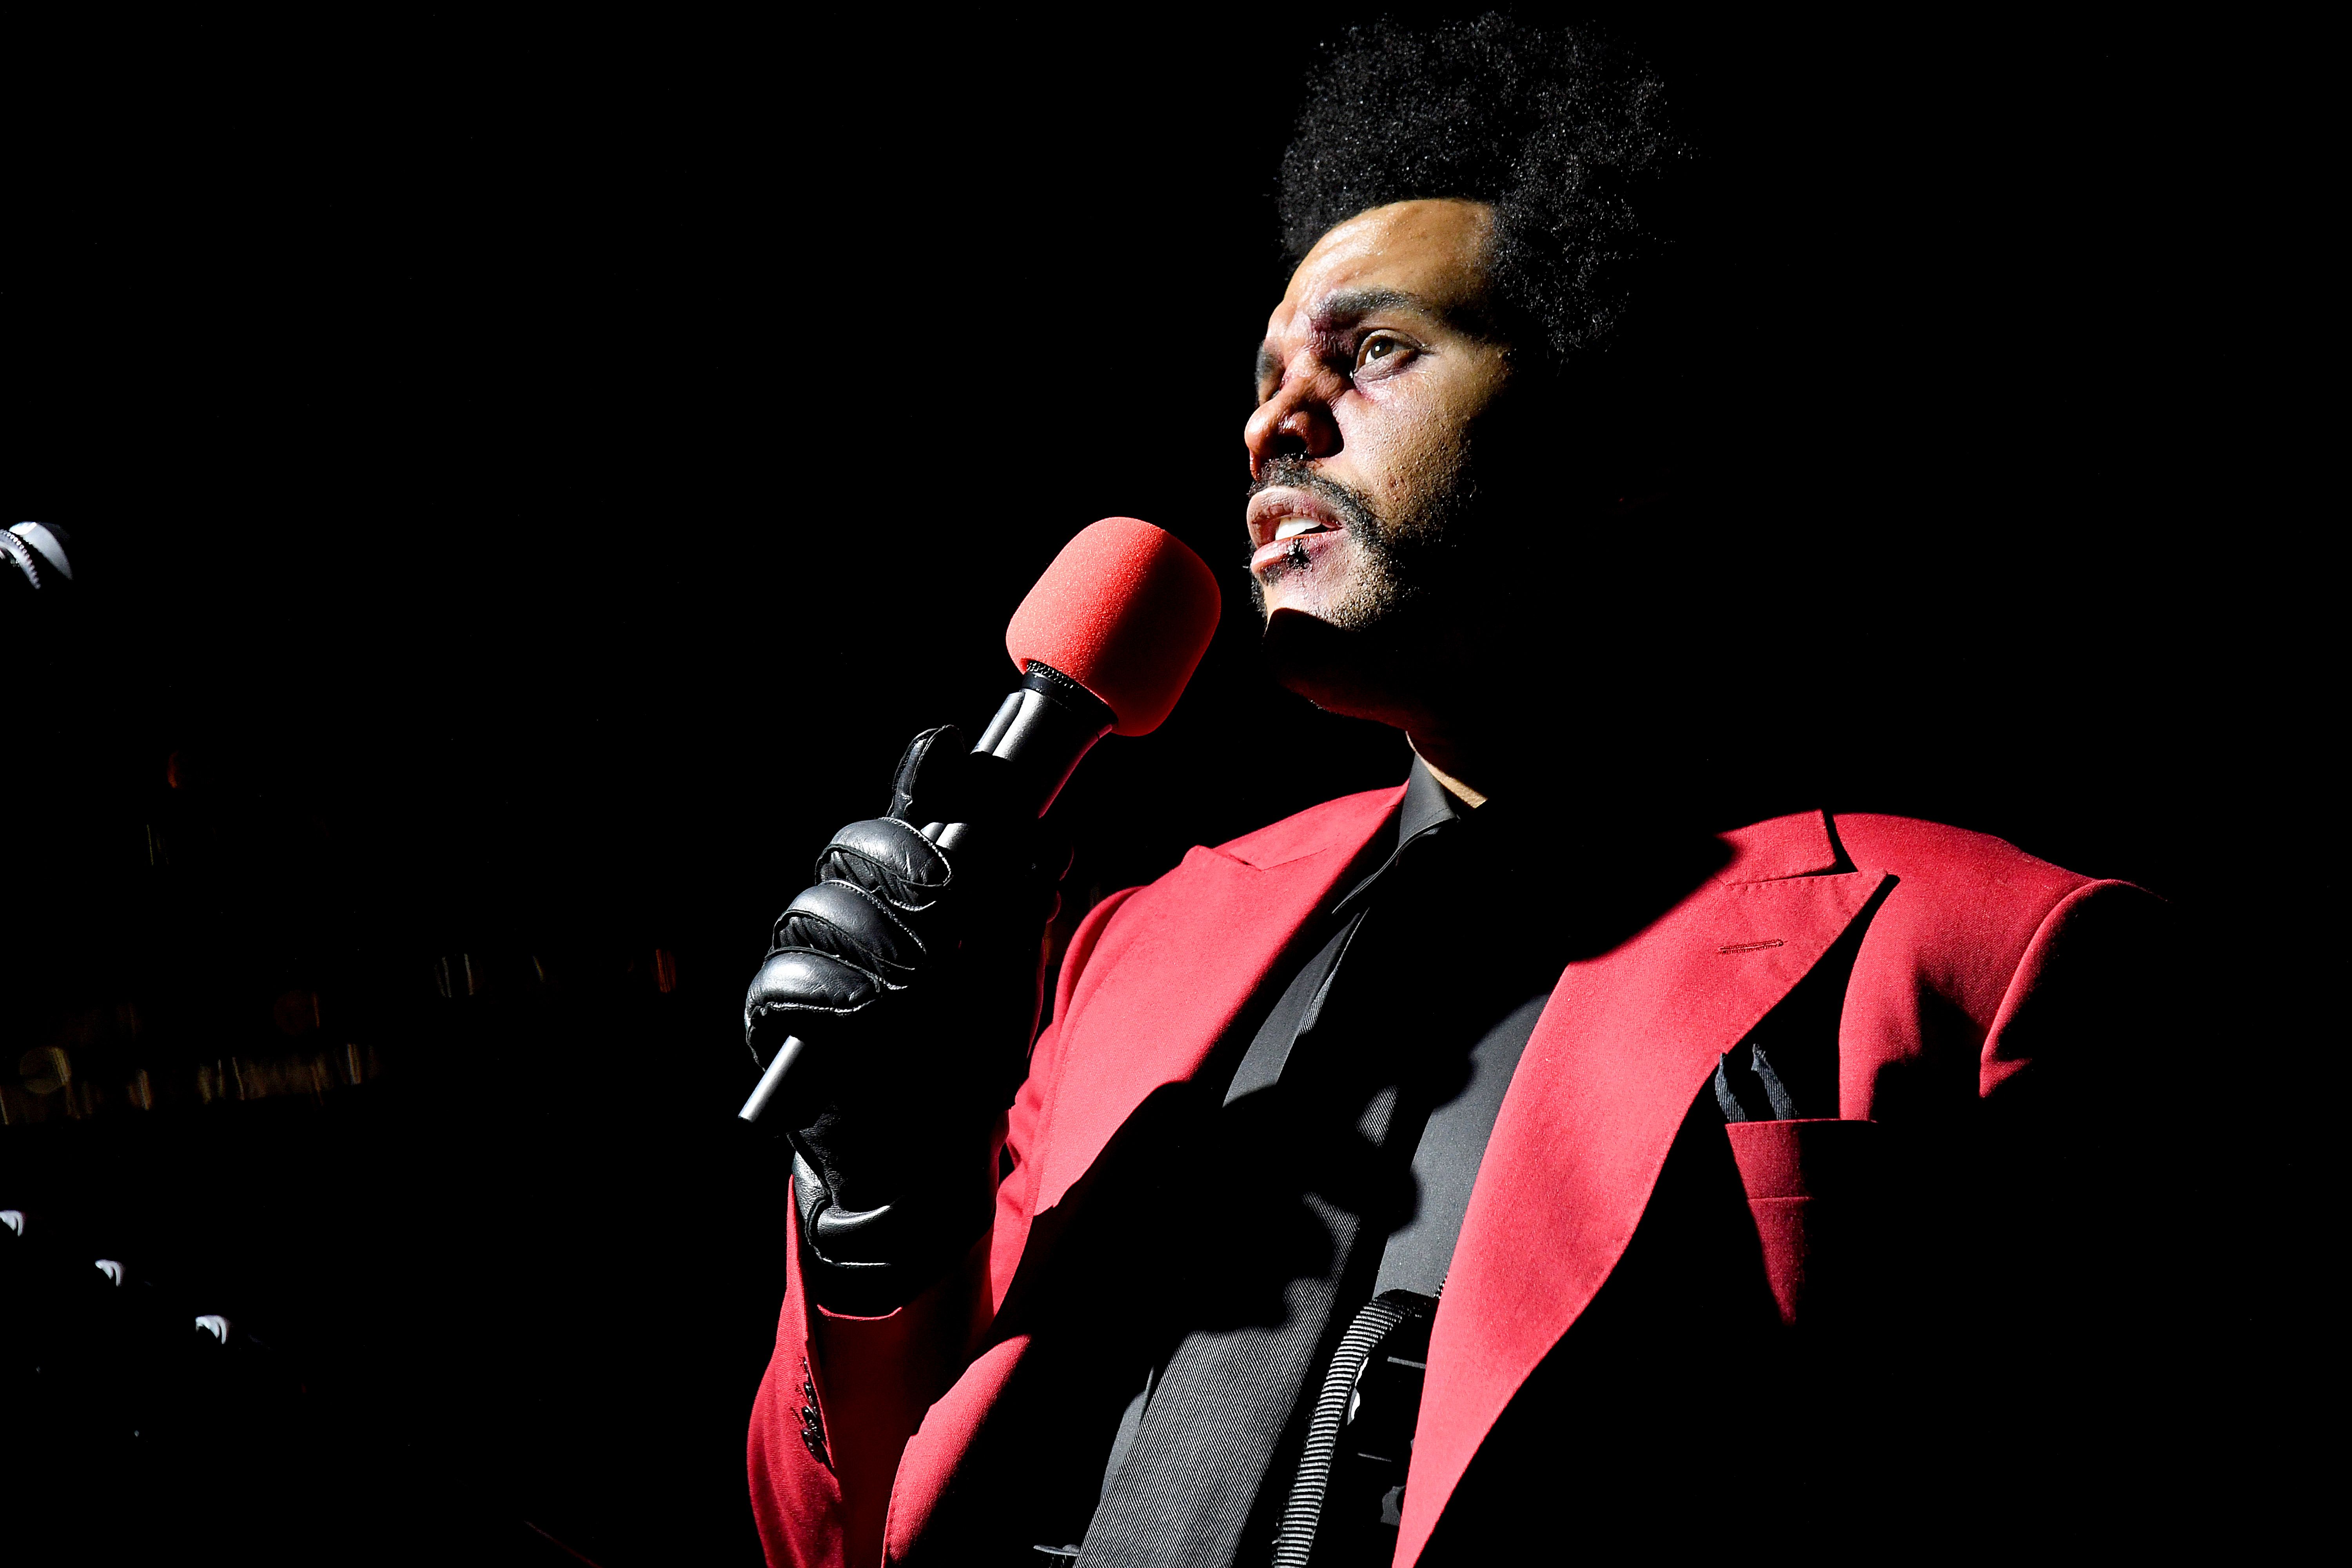 The Weeknd calls Grammy Awards 'corrupt' after nominations snub